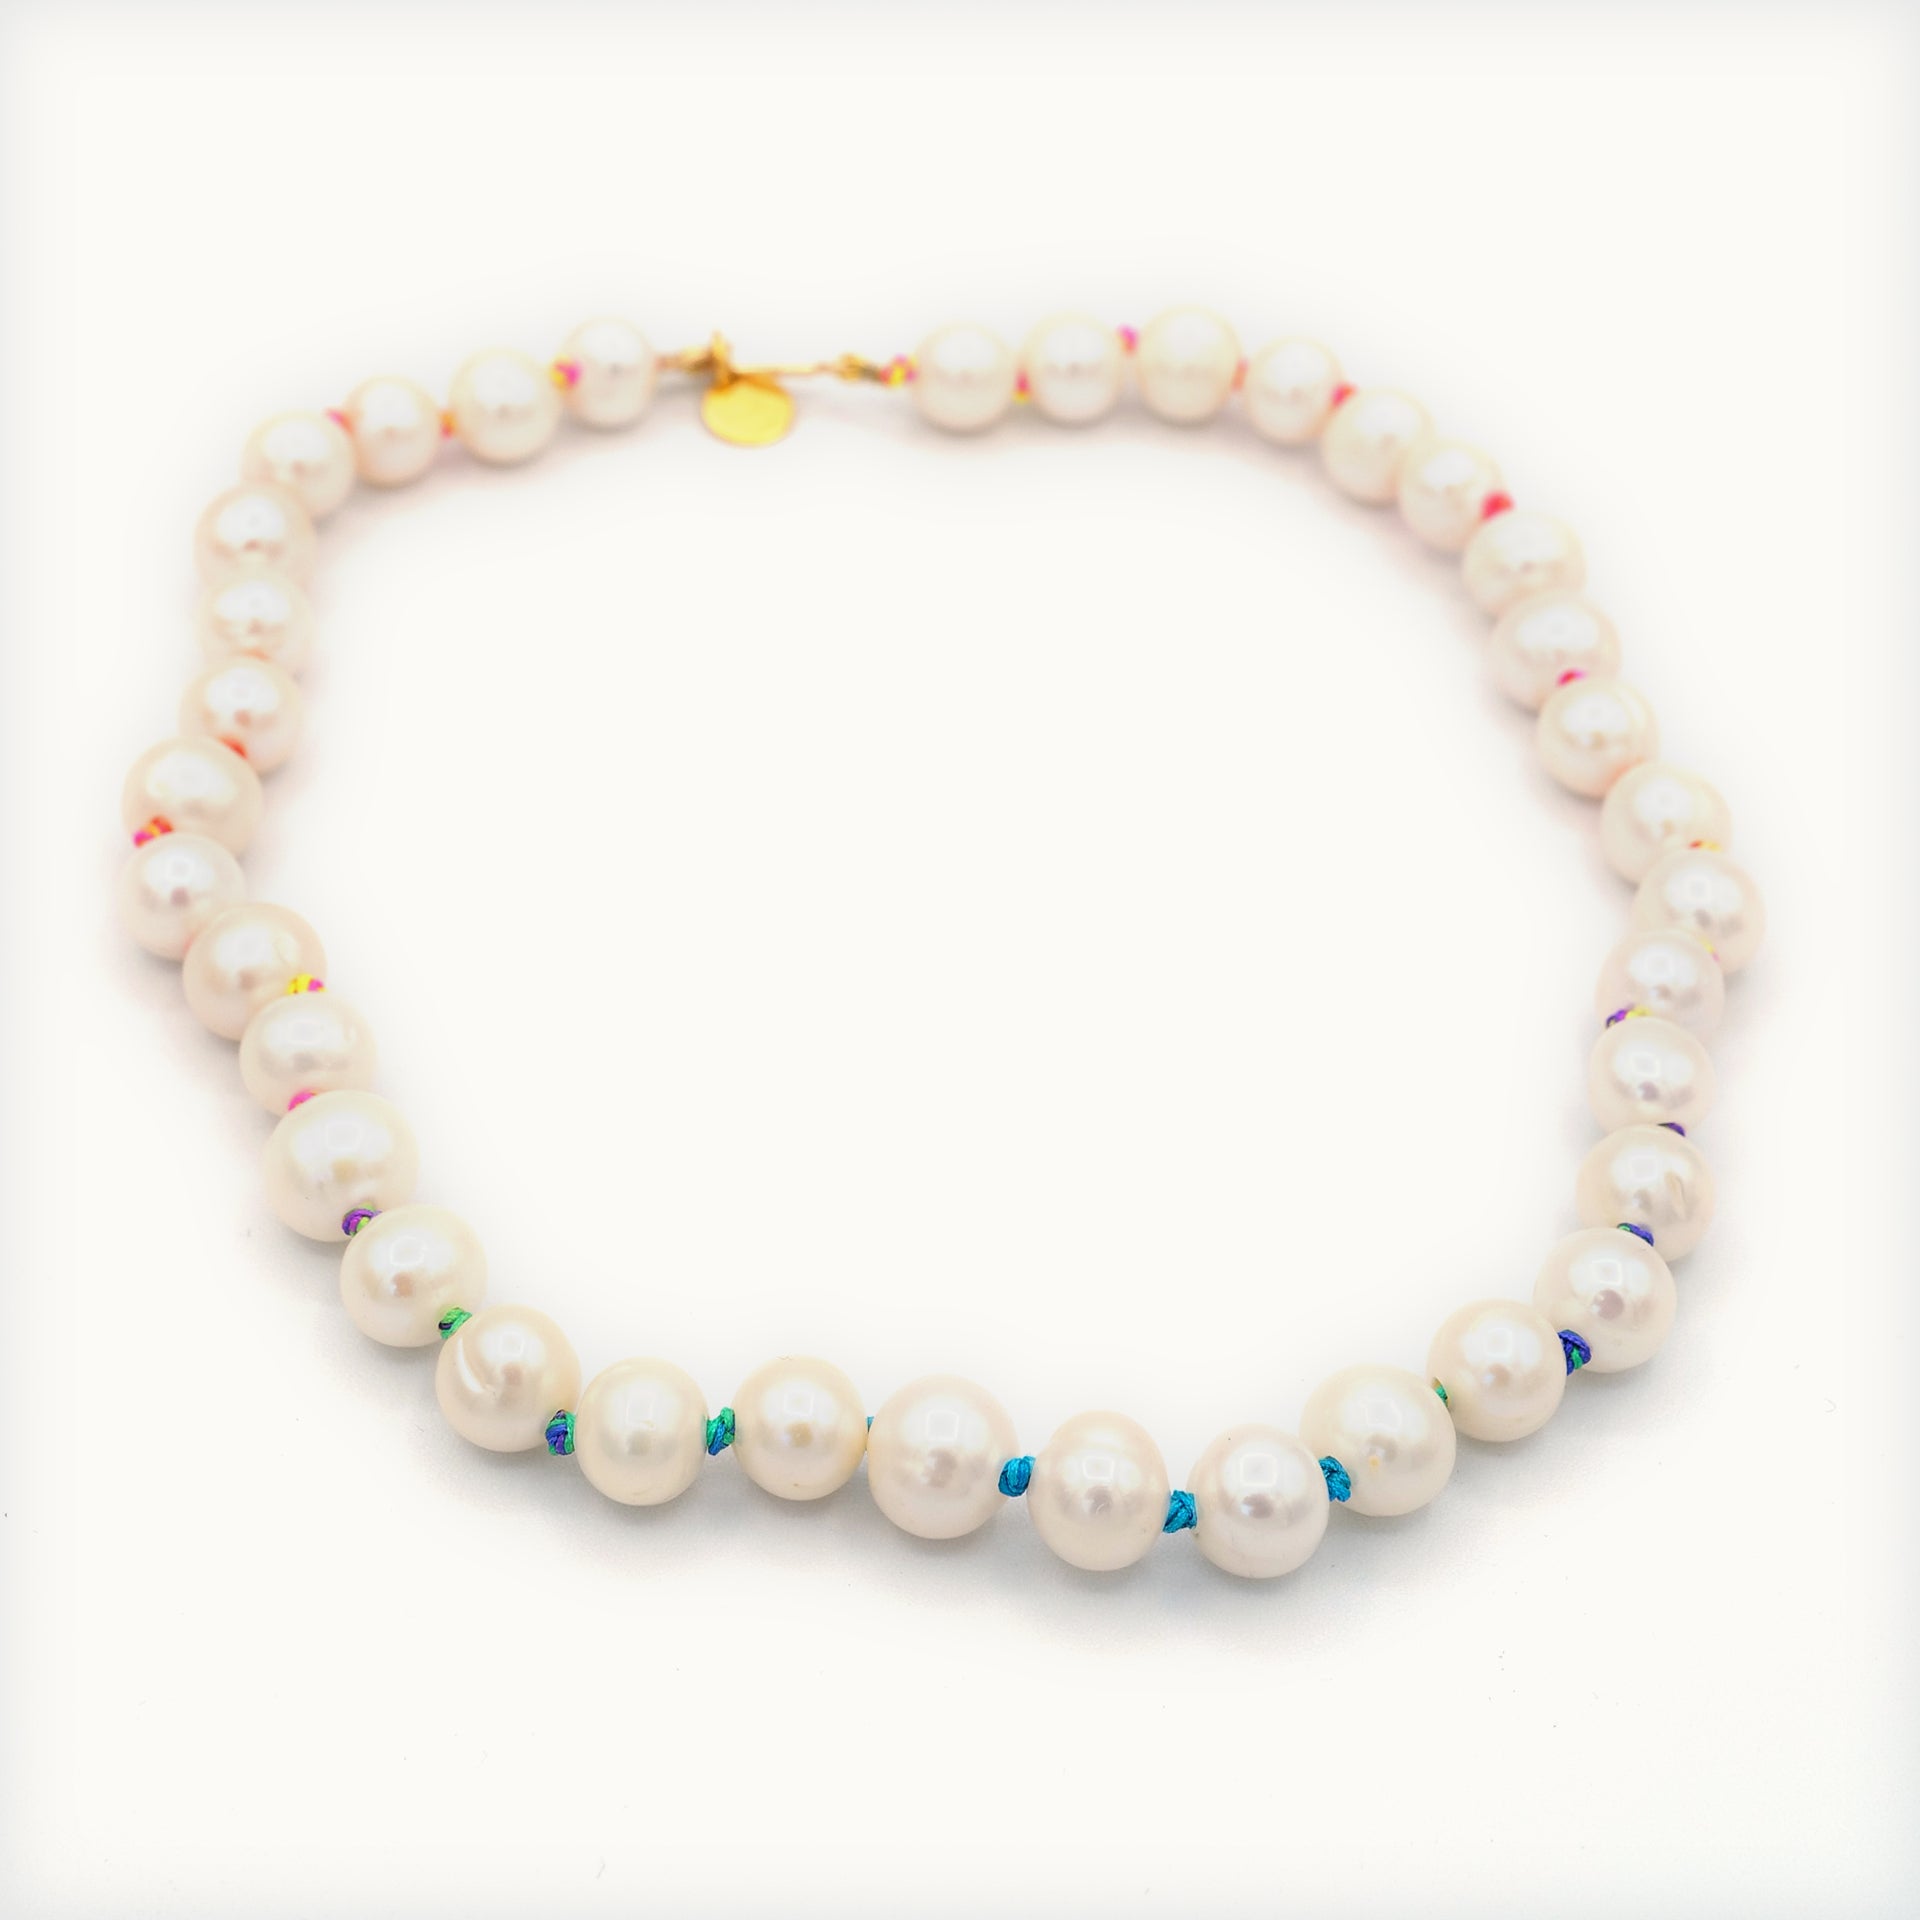 NECKLACE RAINBOW FRESHWATER PEARLS BY 4 CROSSES